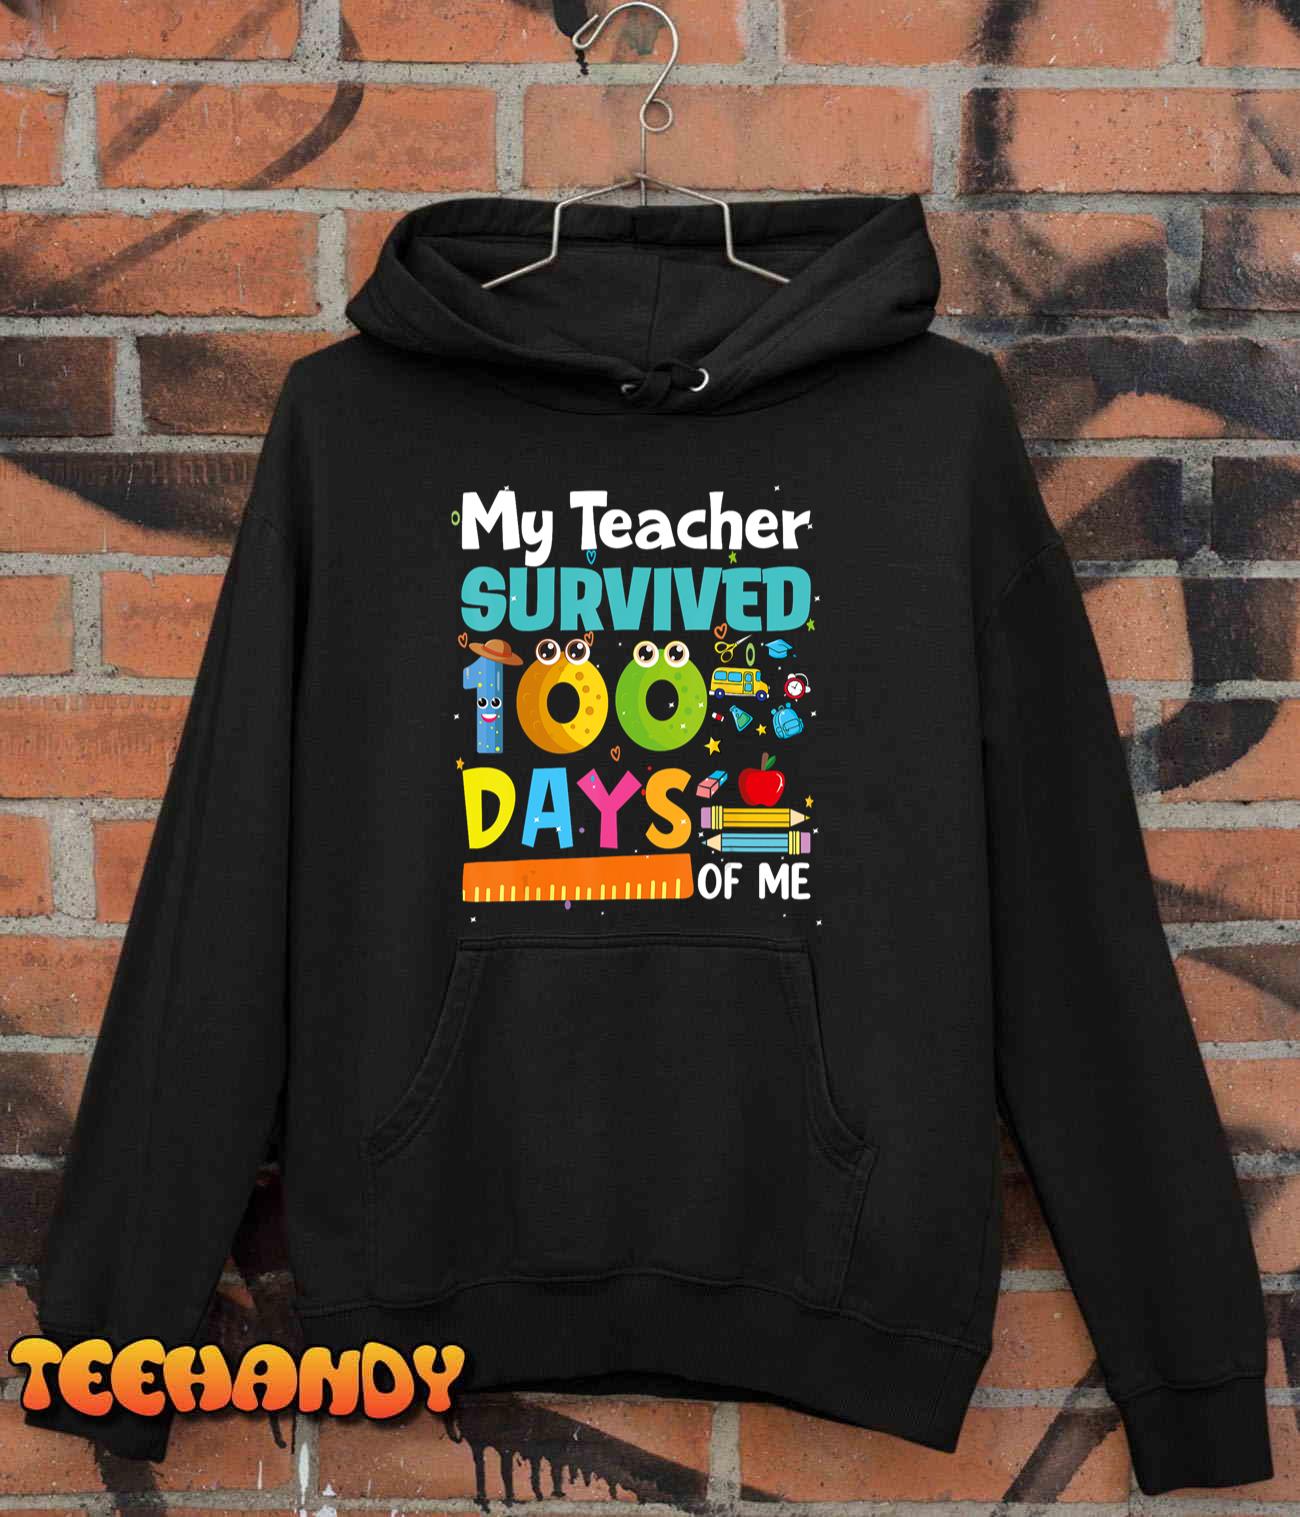 My Teacher Survived 100 Days of Me Funny Unisex T-Shirt